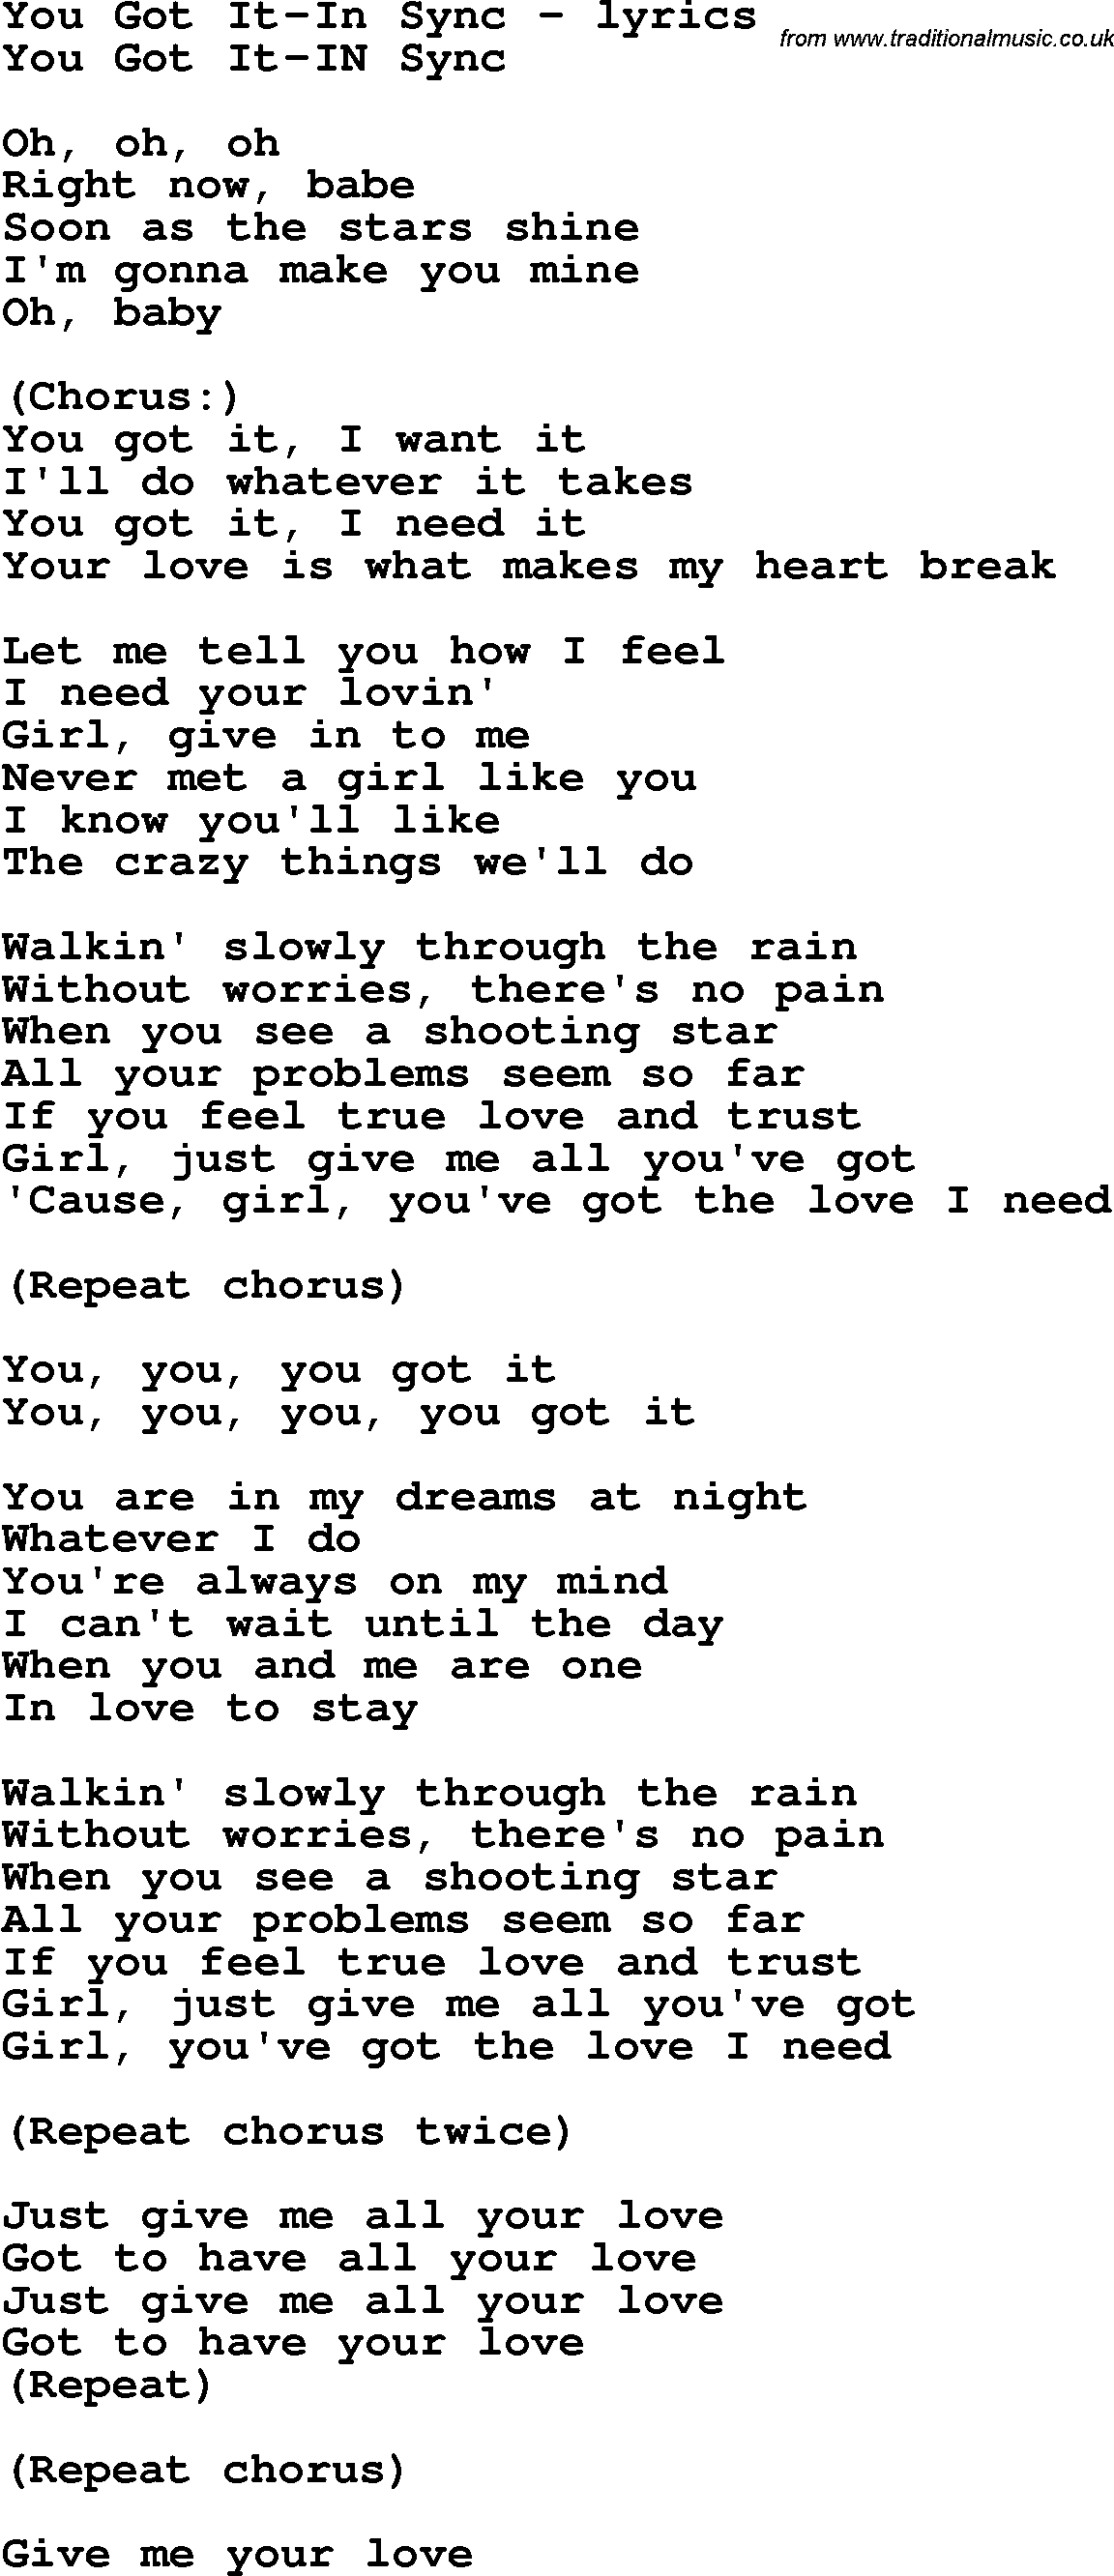 Love Song Lyrics for: You Got It-In Sync